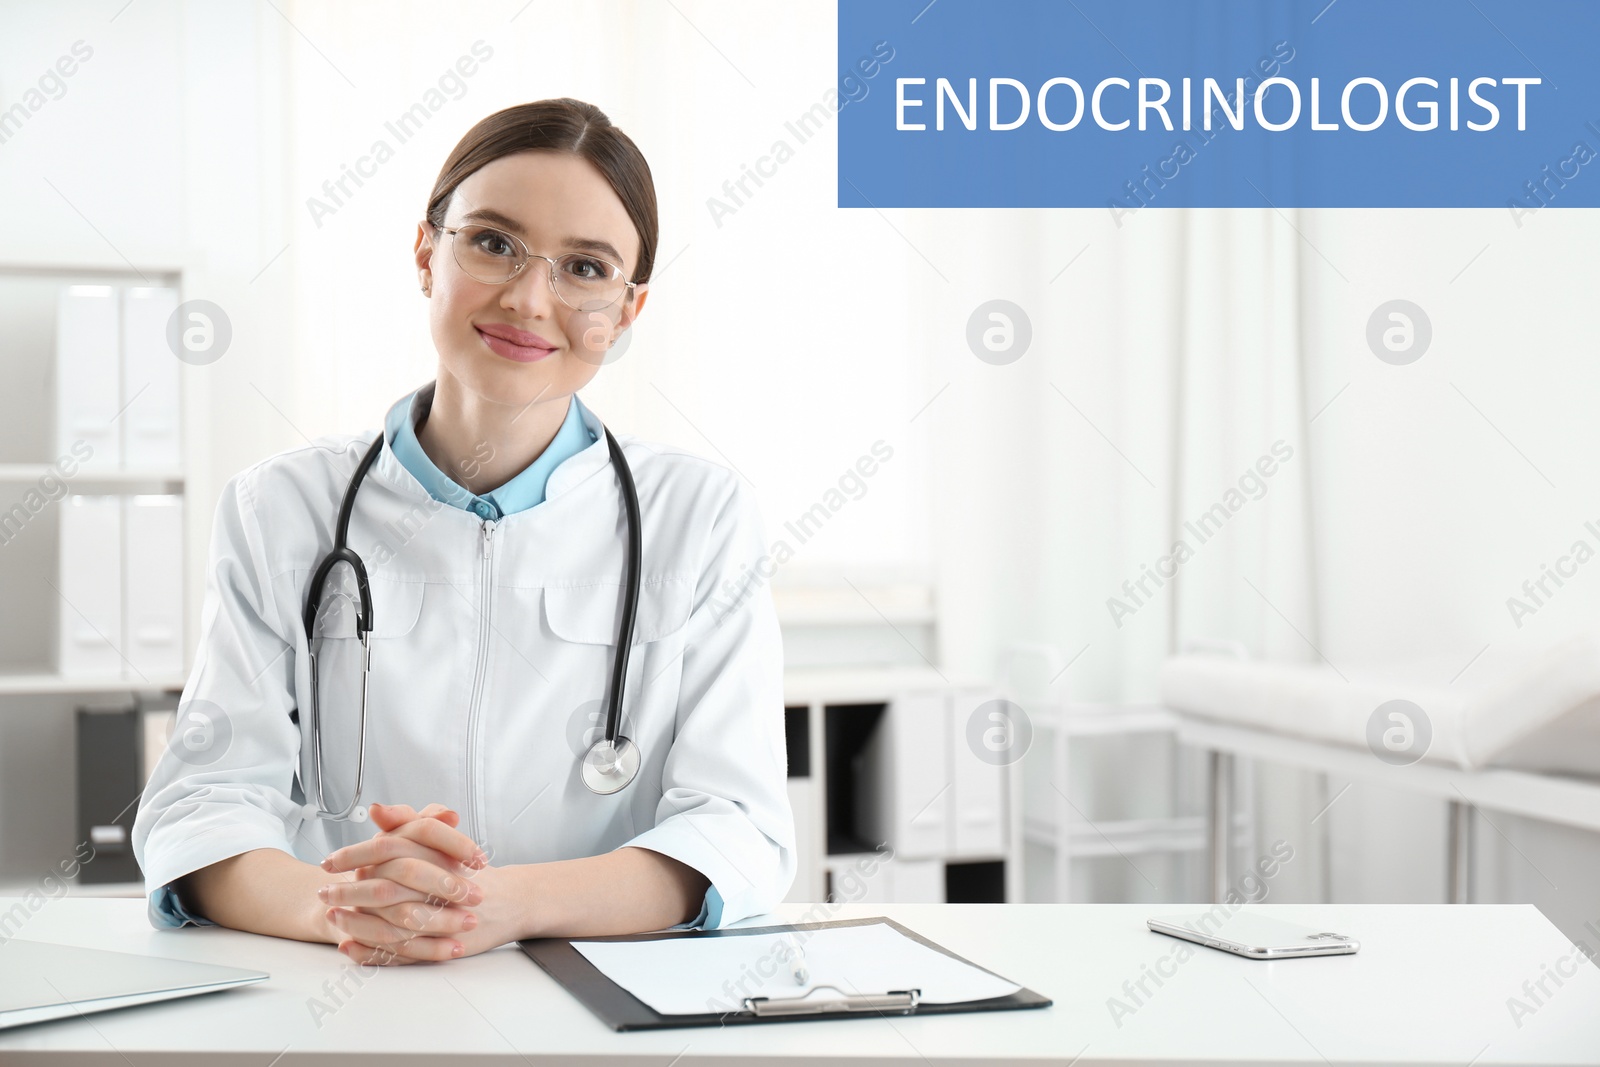 Image of Endocrinologist with stethoscope at white table indoors